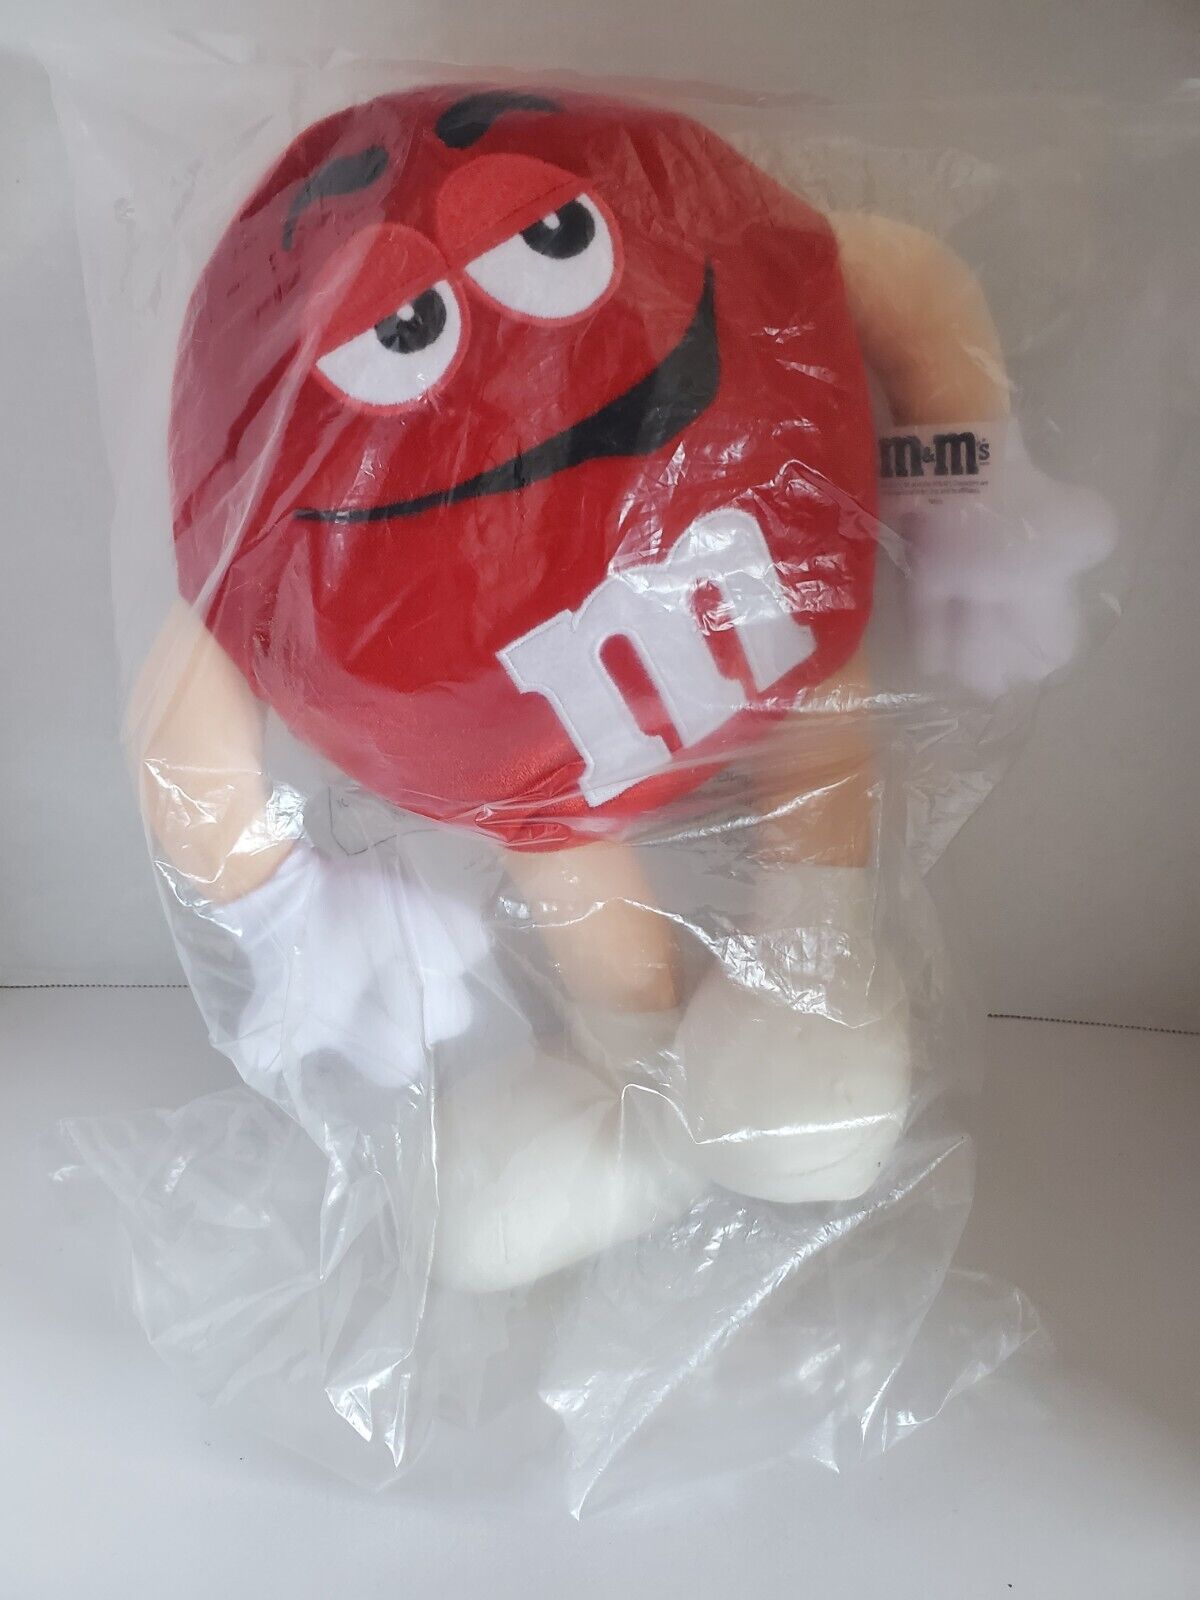 M&M\'s Red Plush Toy Fun Friend 2000 Mars Commonwealth Toy- NEW